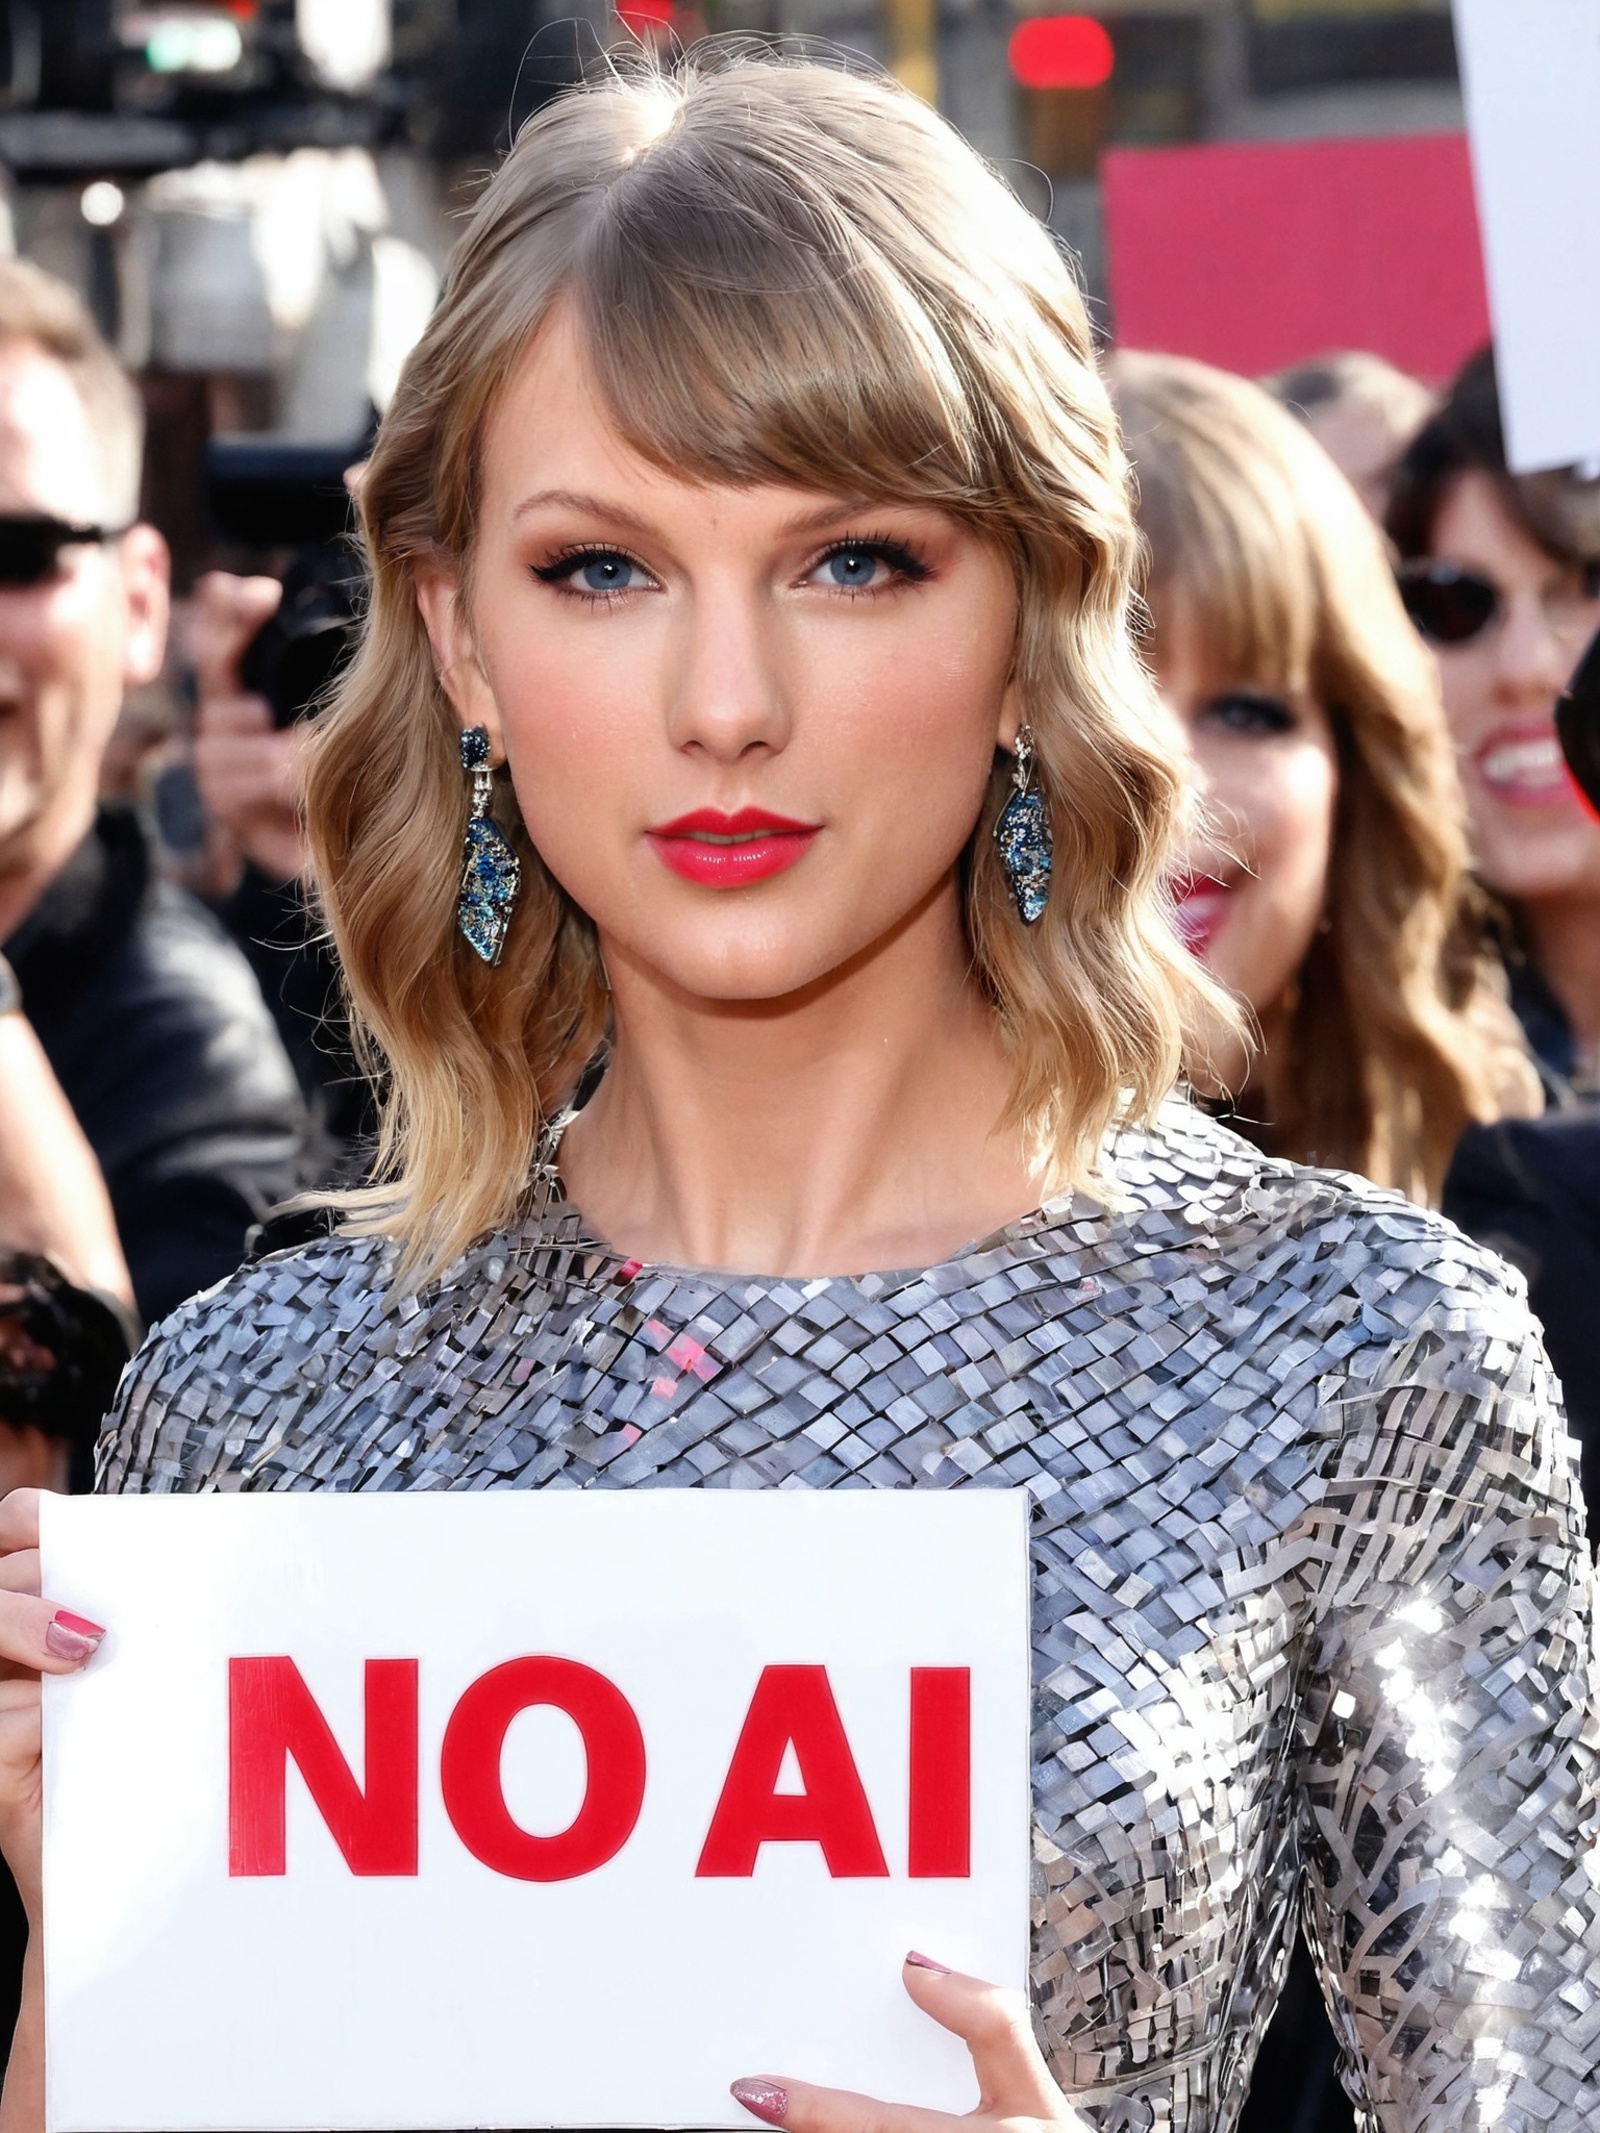 Taylor Swift image by Dead_Internet_Theory